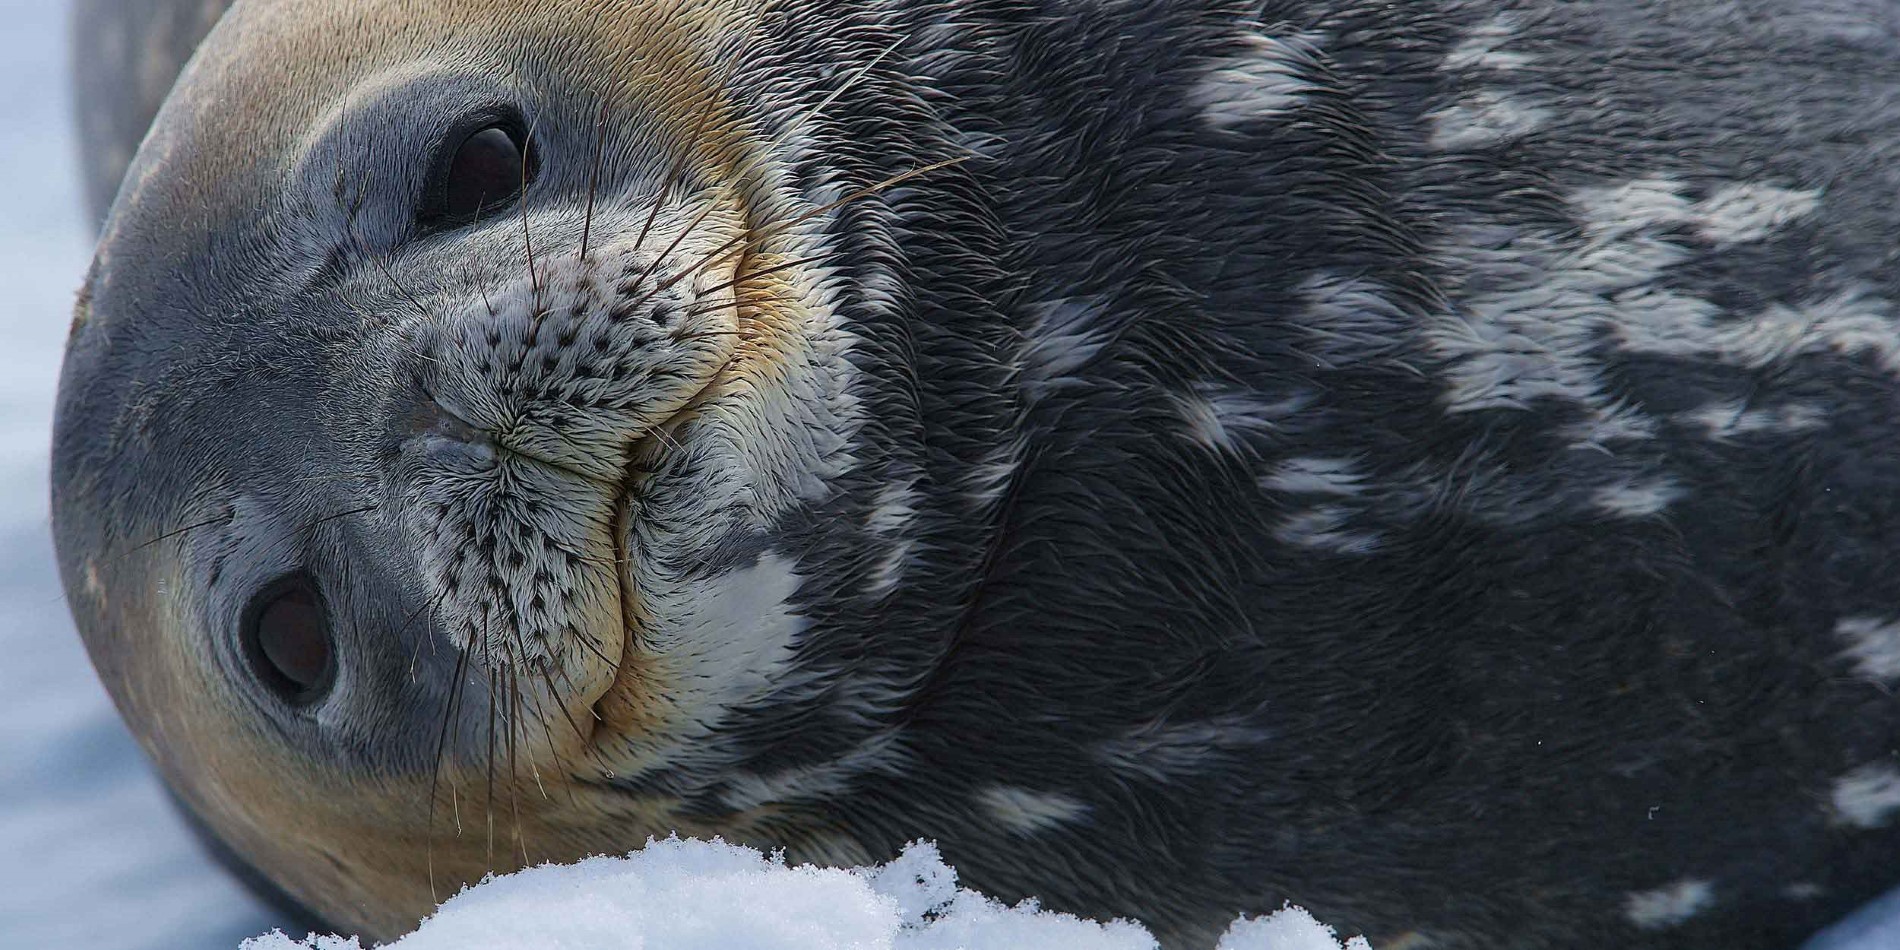 Close-up photo of a seal in Antarctica